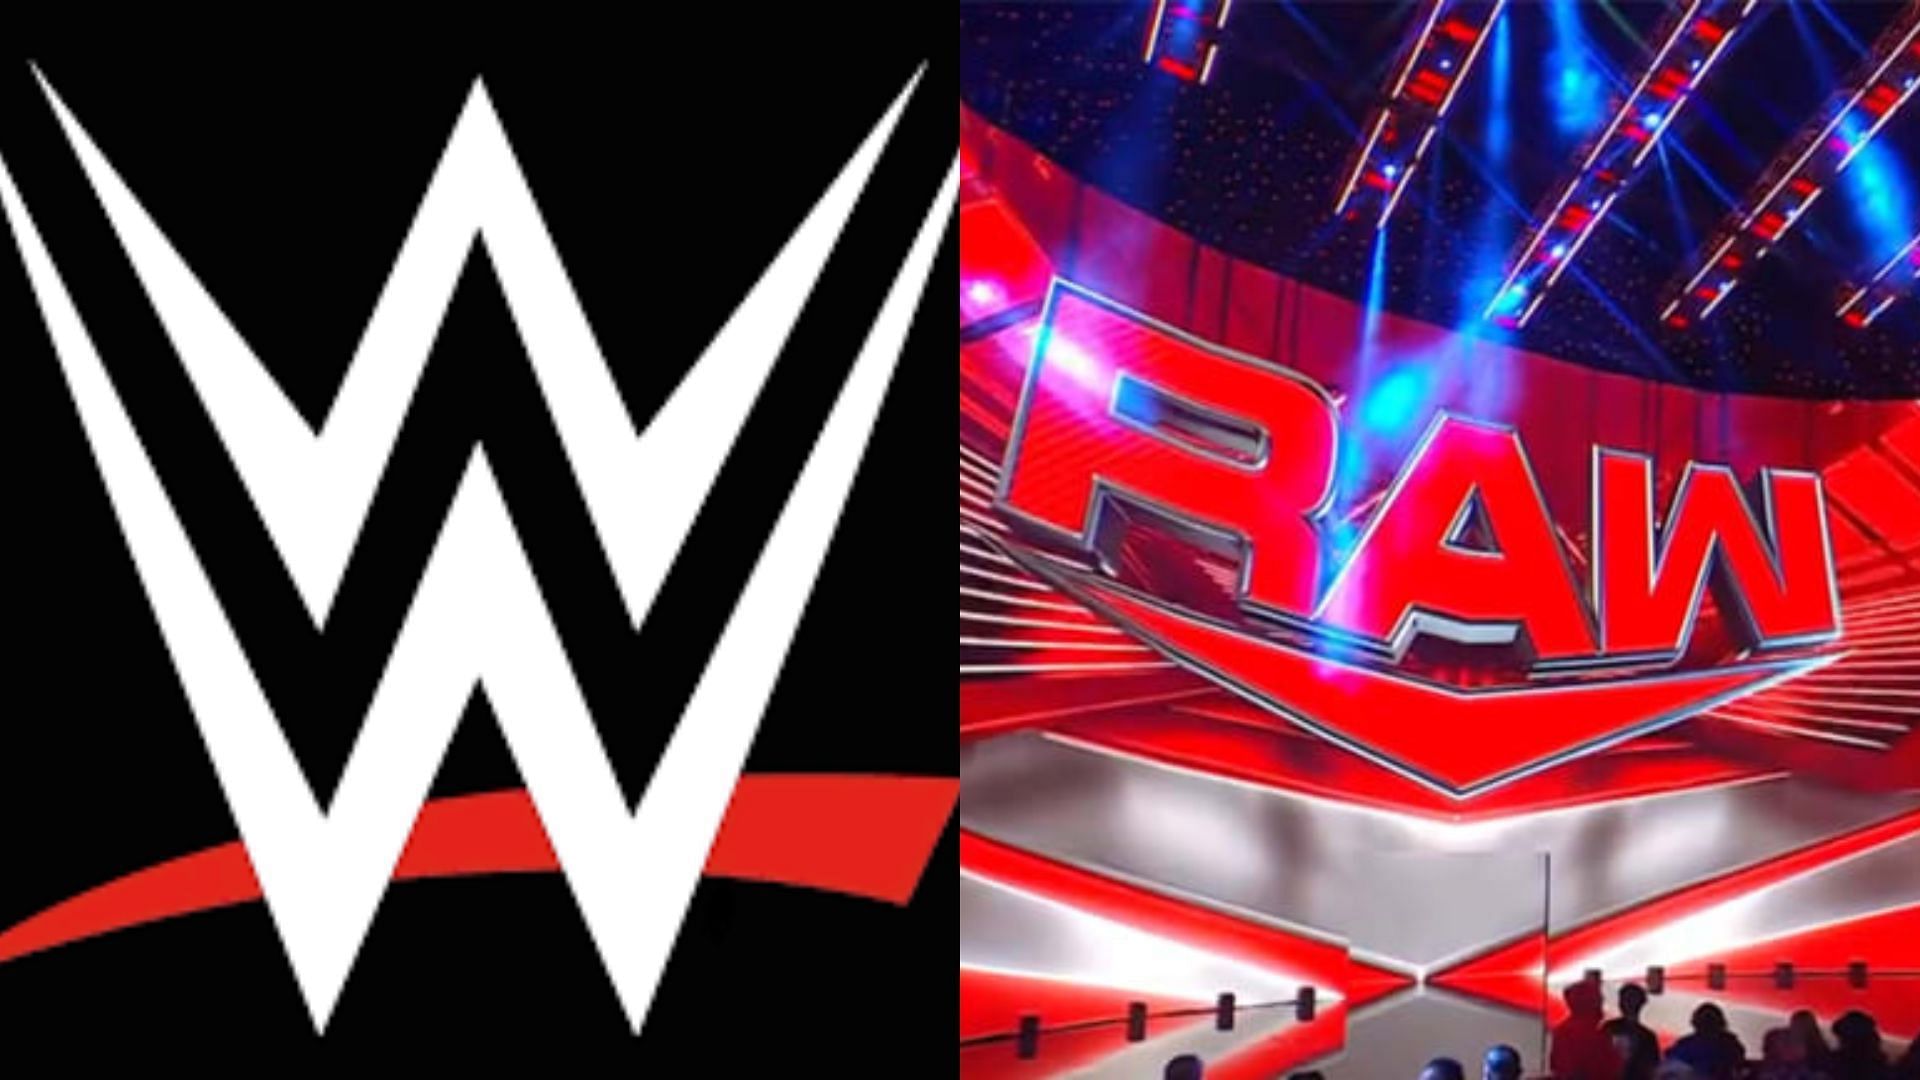 WWE teased a title match on RAW this week